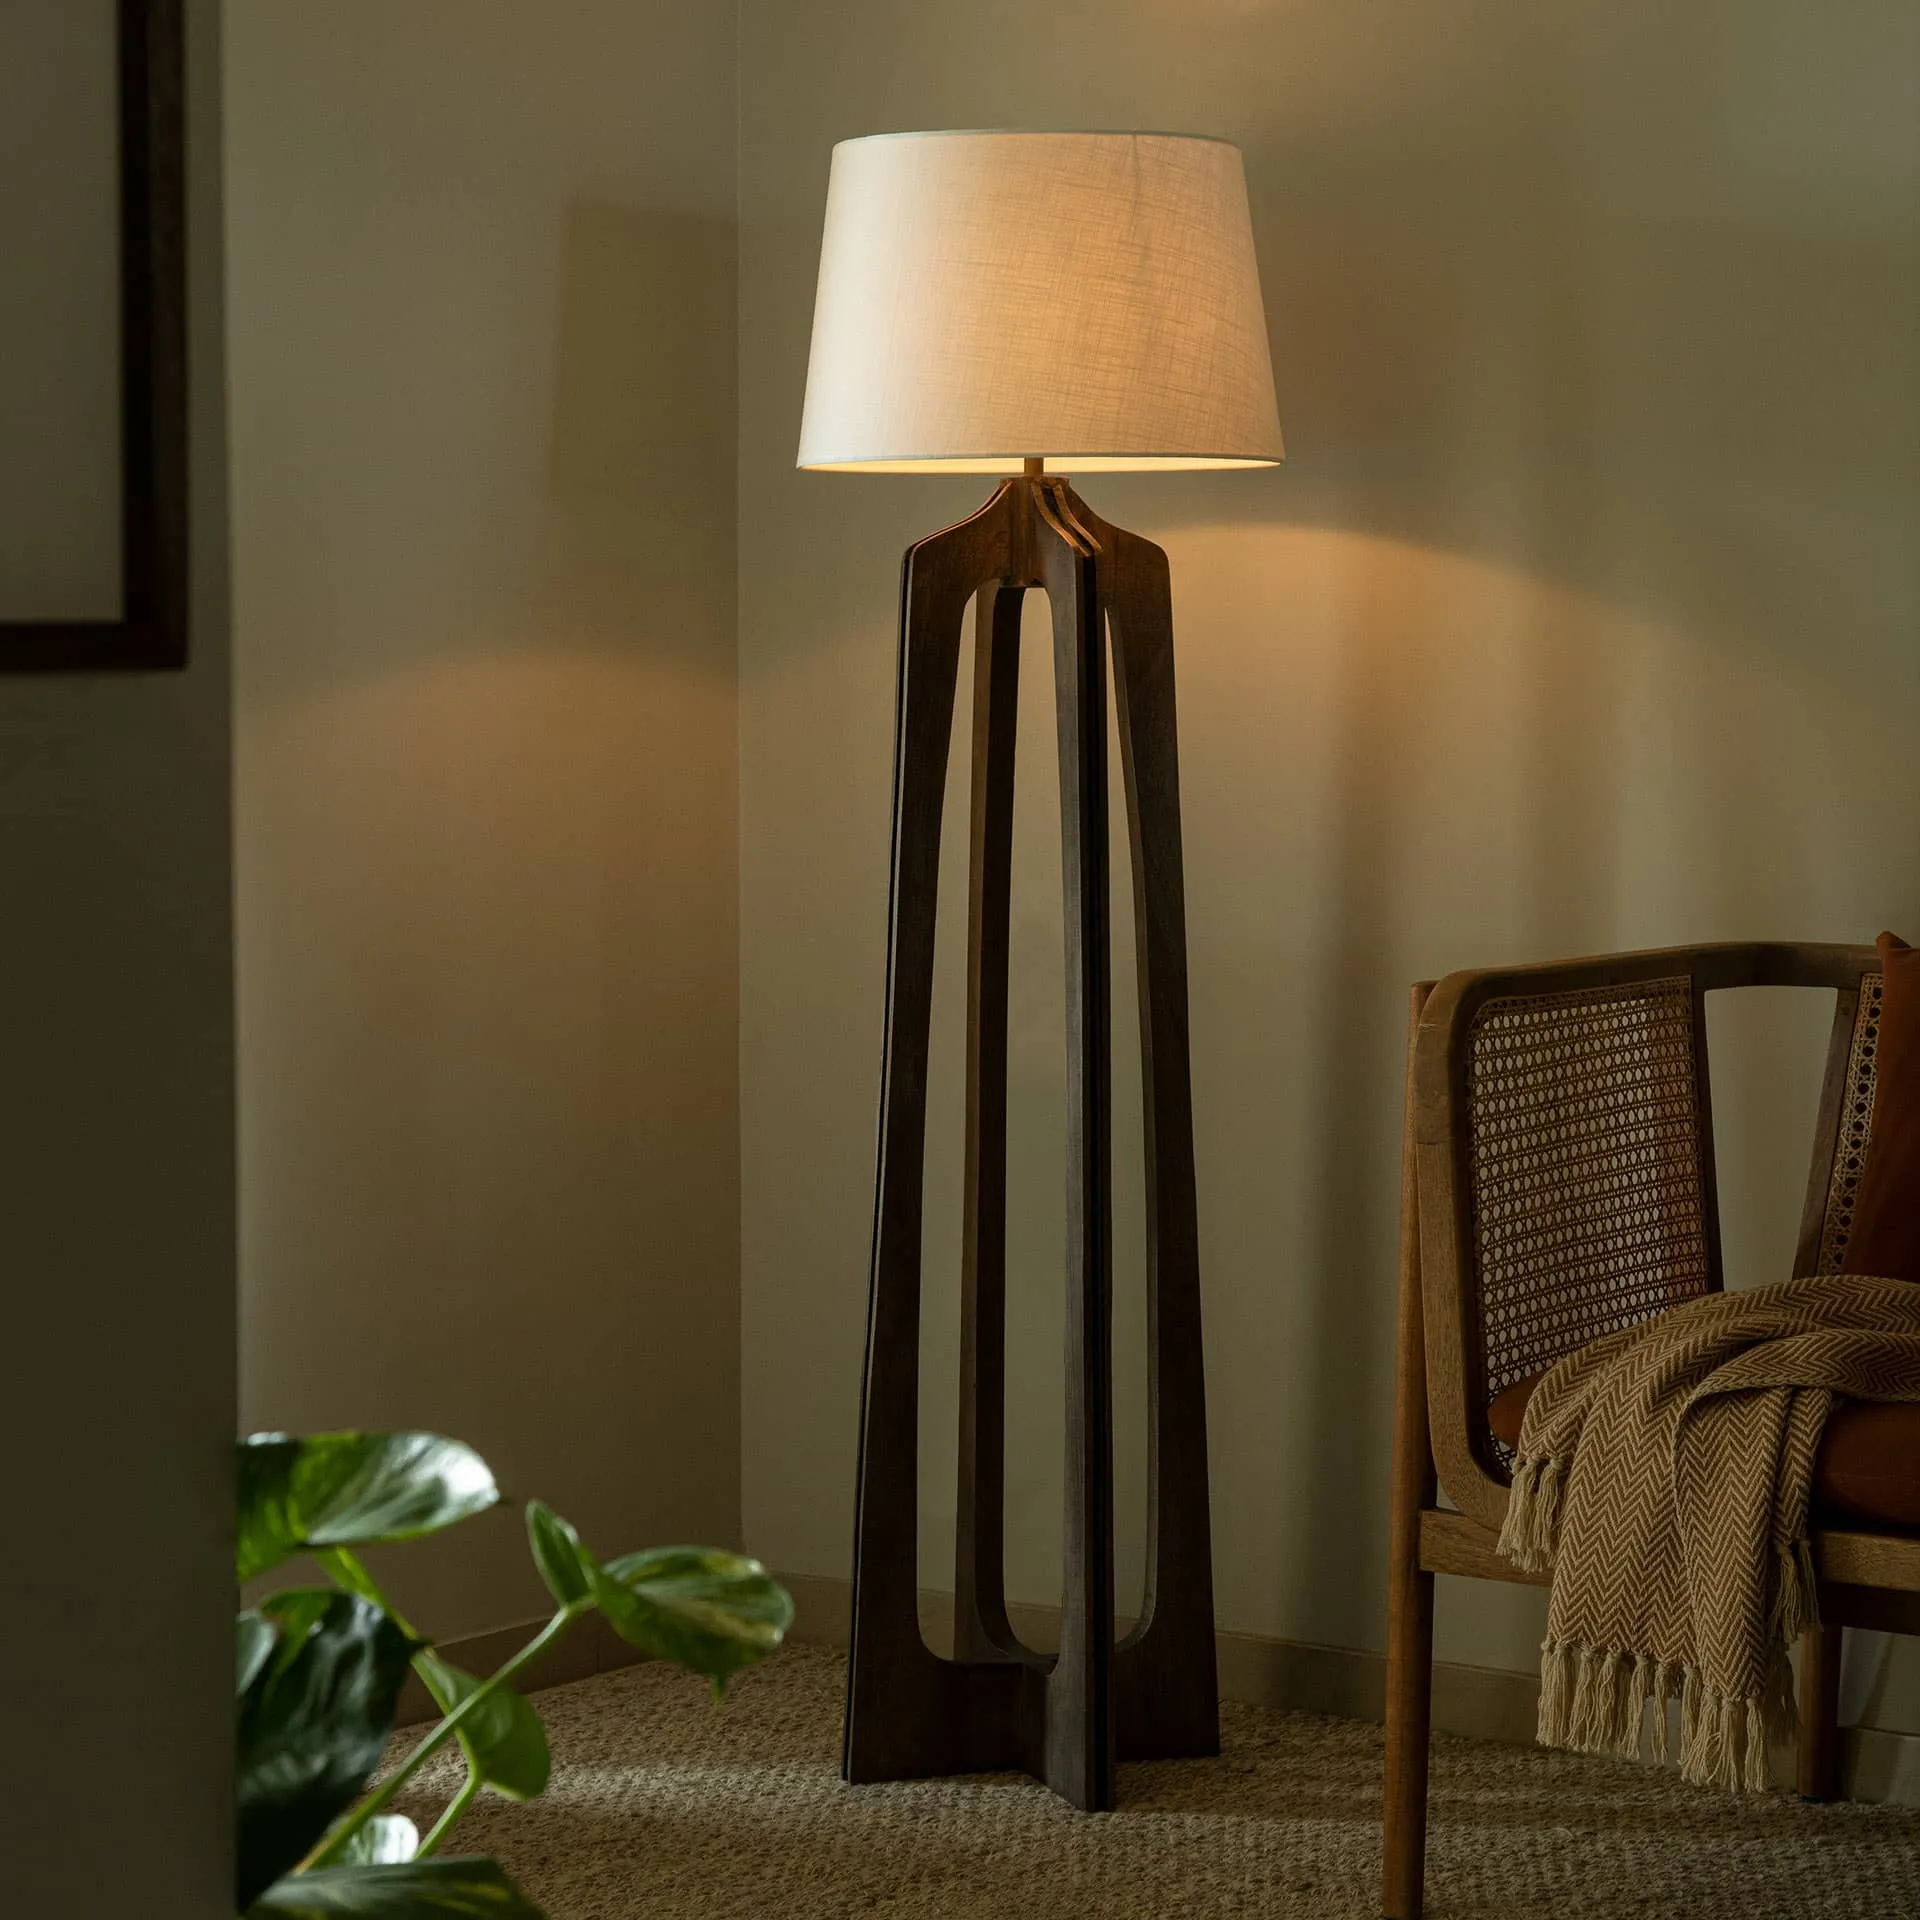 dual-tone s،light, with vintage touch, placed in a living room corner, indoor plant, wooden chair, uplighters floor lamps, available online